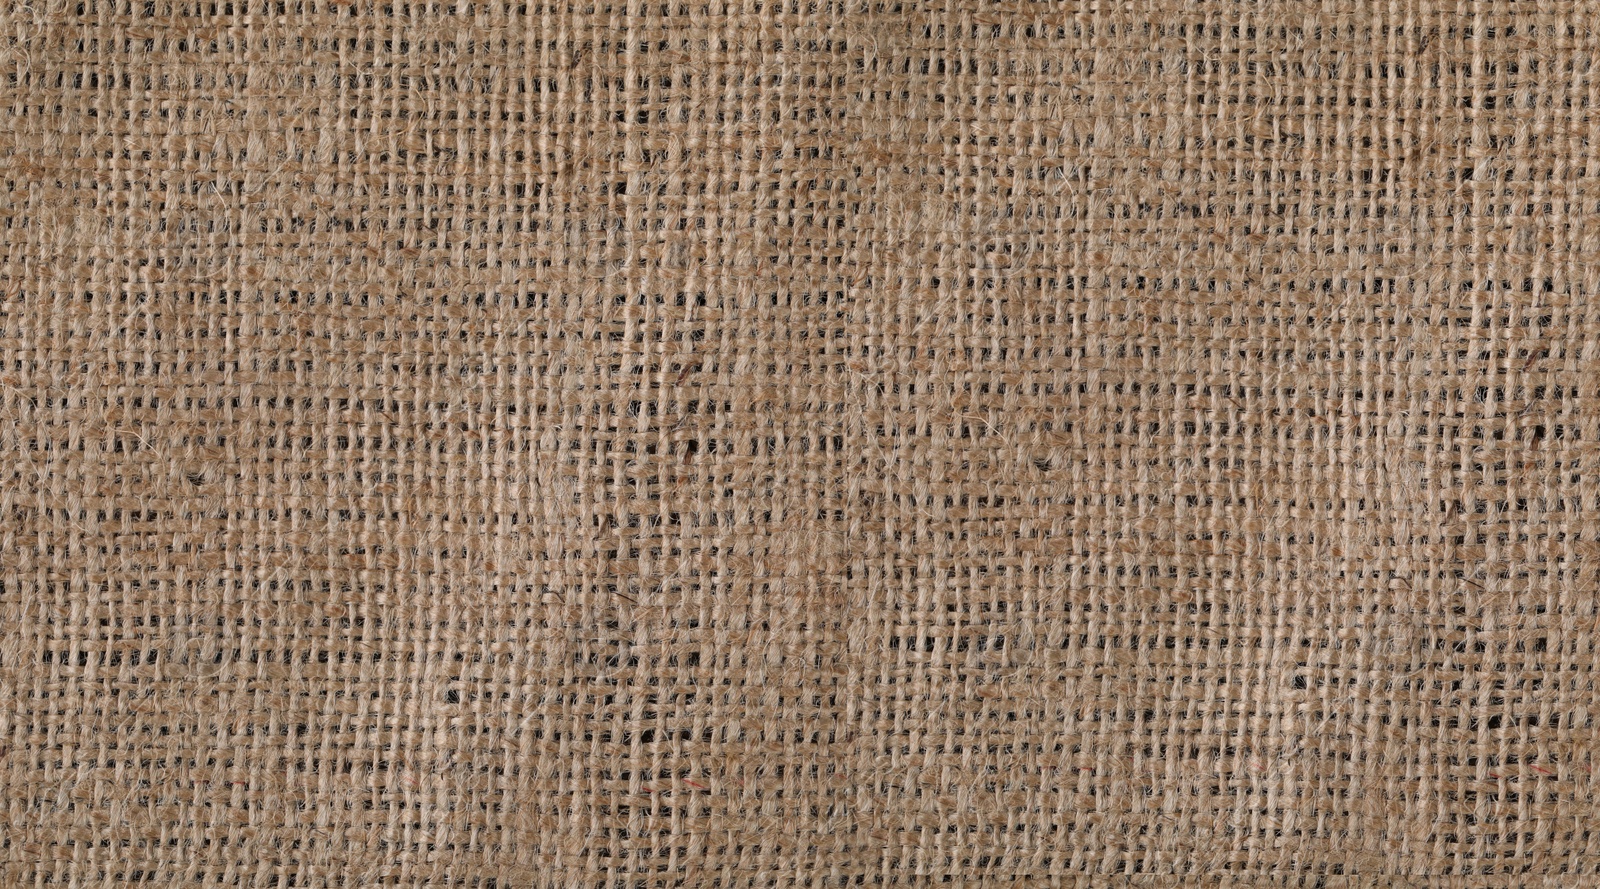 Photo of Brown burlap fabric as background, top view